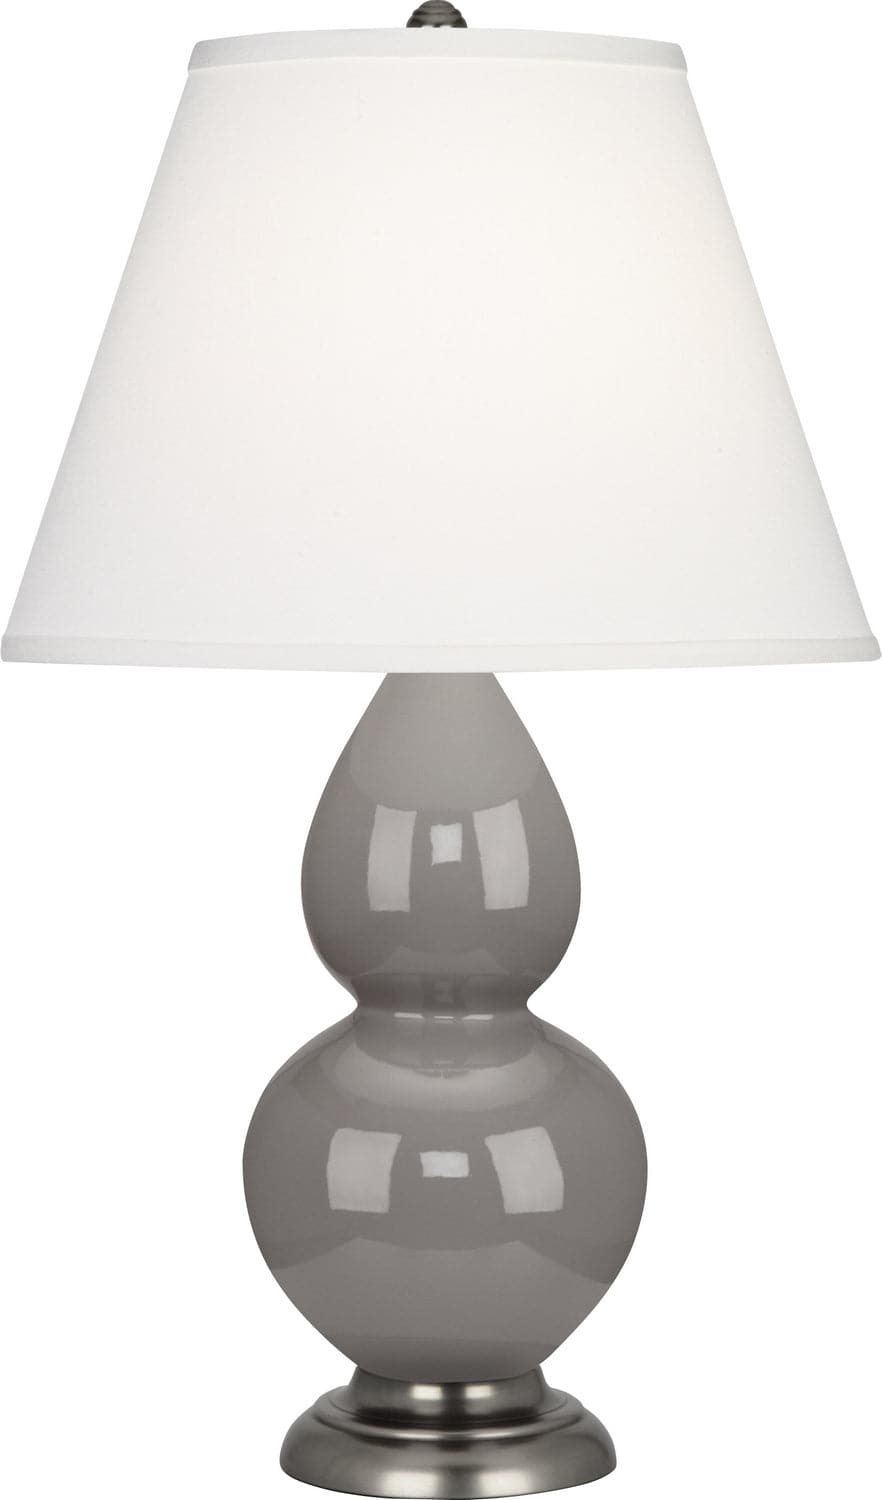 Robert Abbey - 1770X - One Light Accent Lamp - Small Double Gourd - Smoky Taupe Glazed